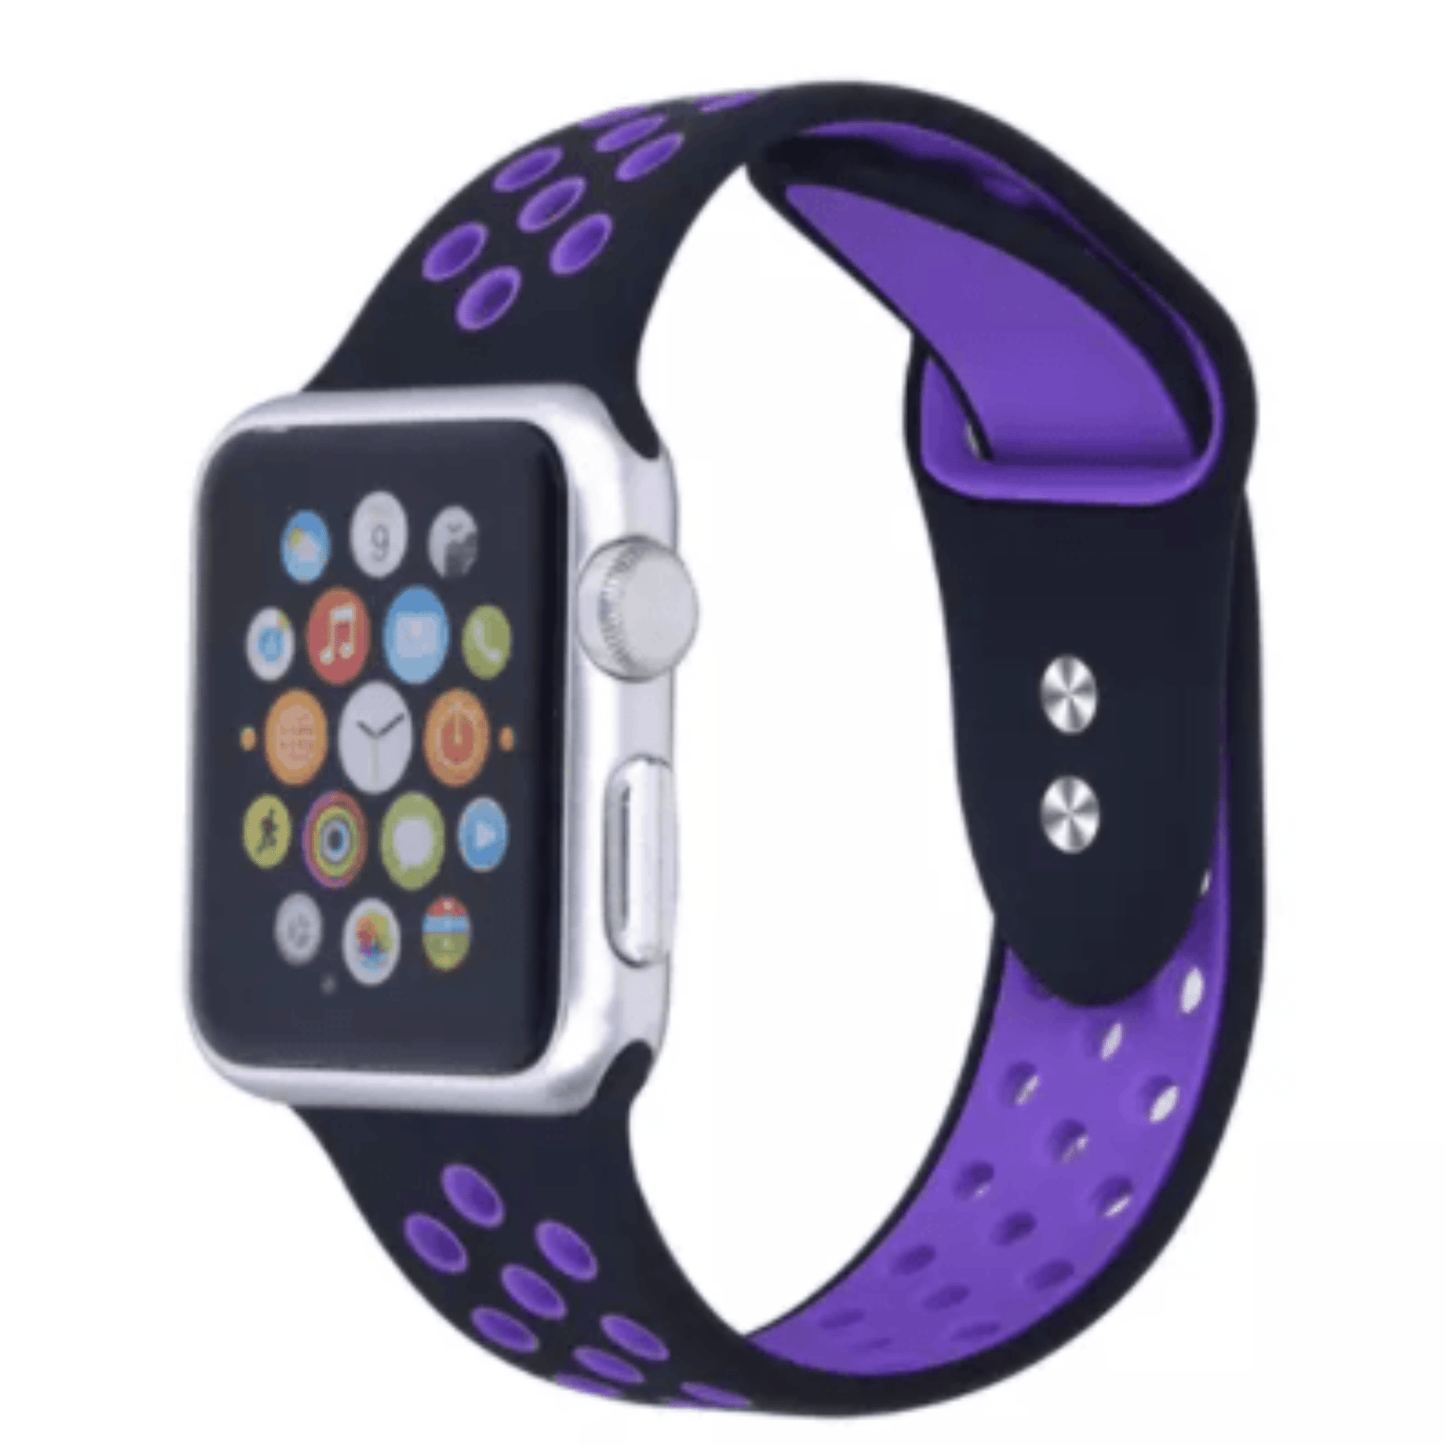 Breathable Silicone Sport Replacement Band for Apple Watch Black Purple Apple Watch Band Elements Watches